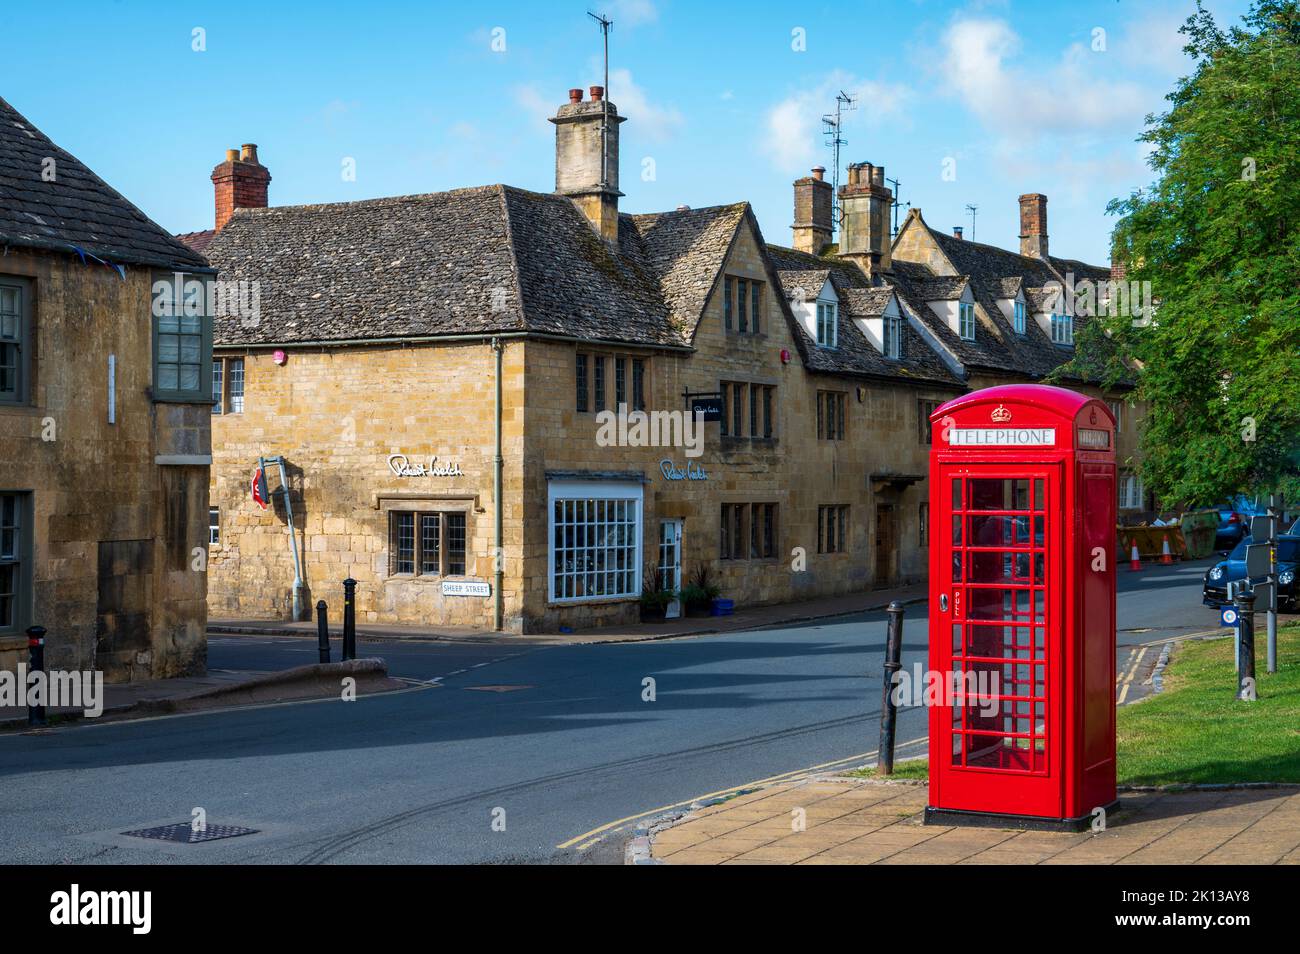 Rote Telefondose in High Street, Chipping Campden, Cotswolds, Gloucestershire, England, Vereinigtes Königreich, Europa Stockfoto